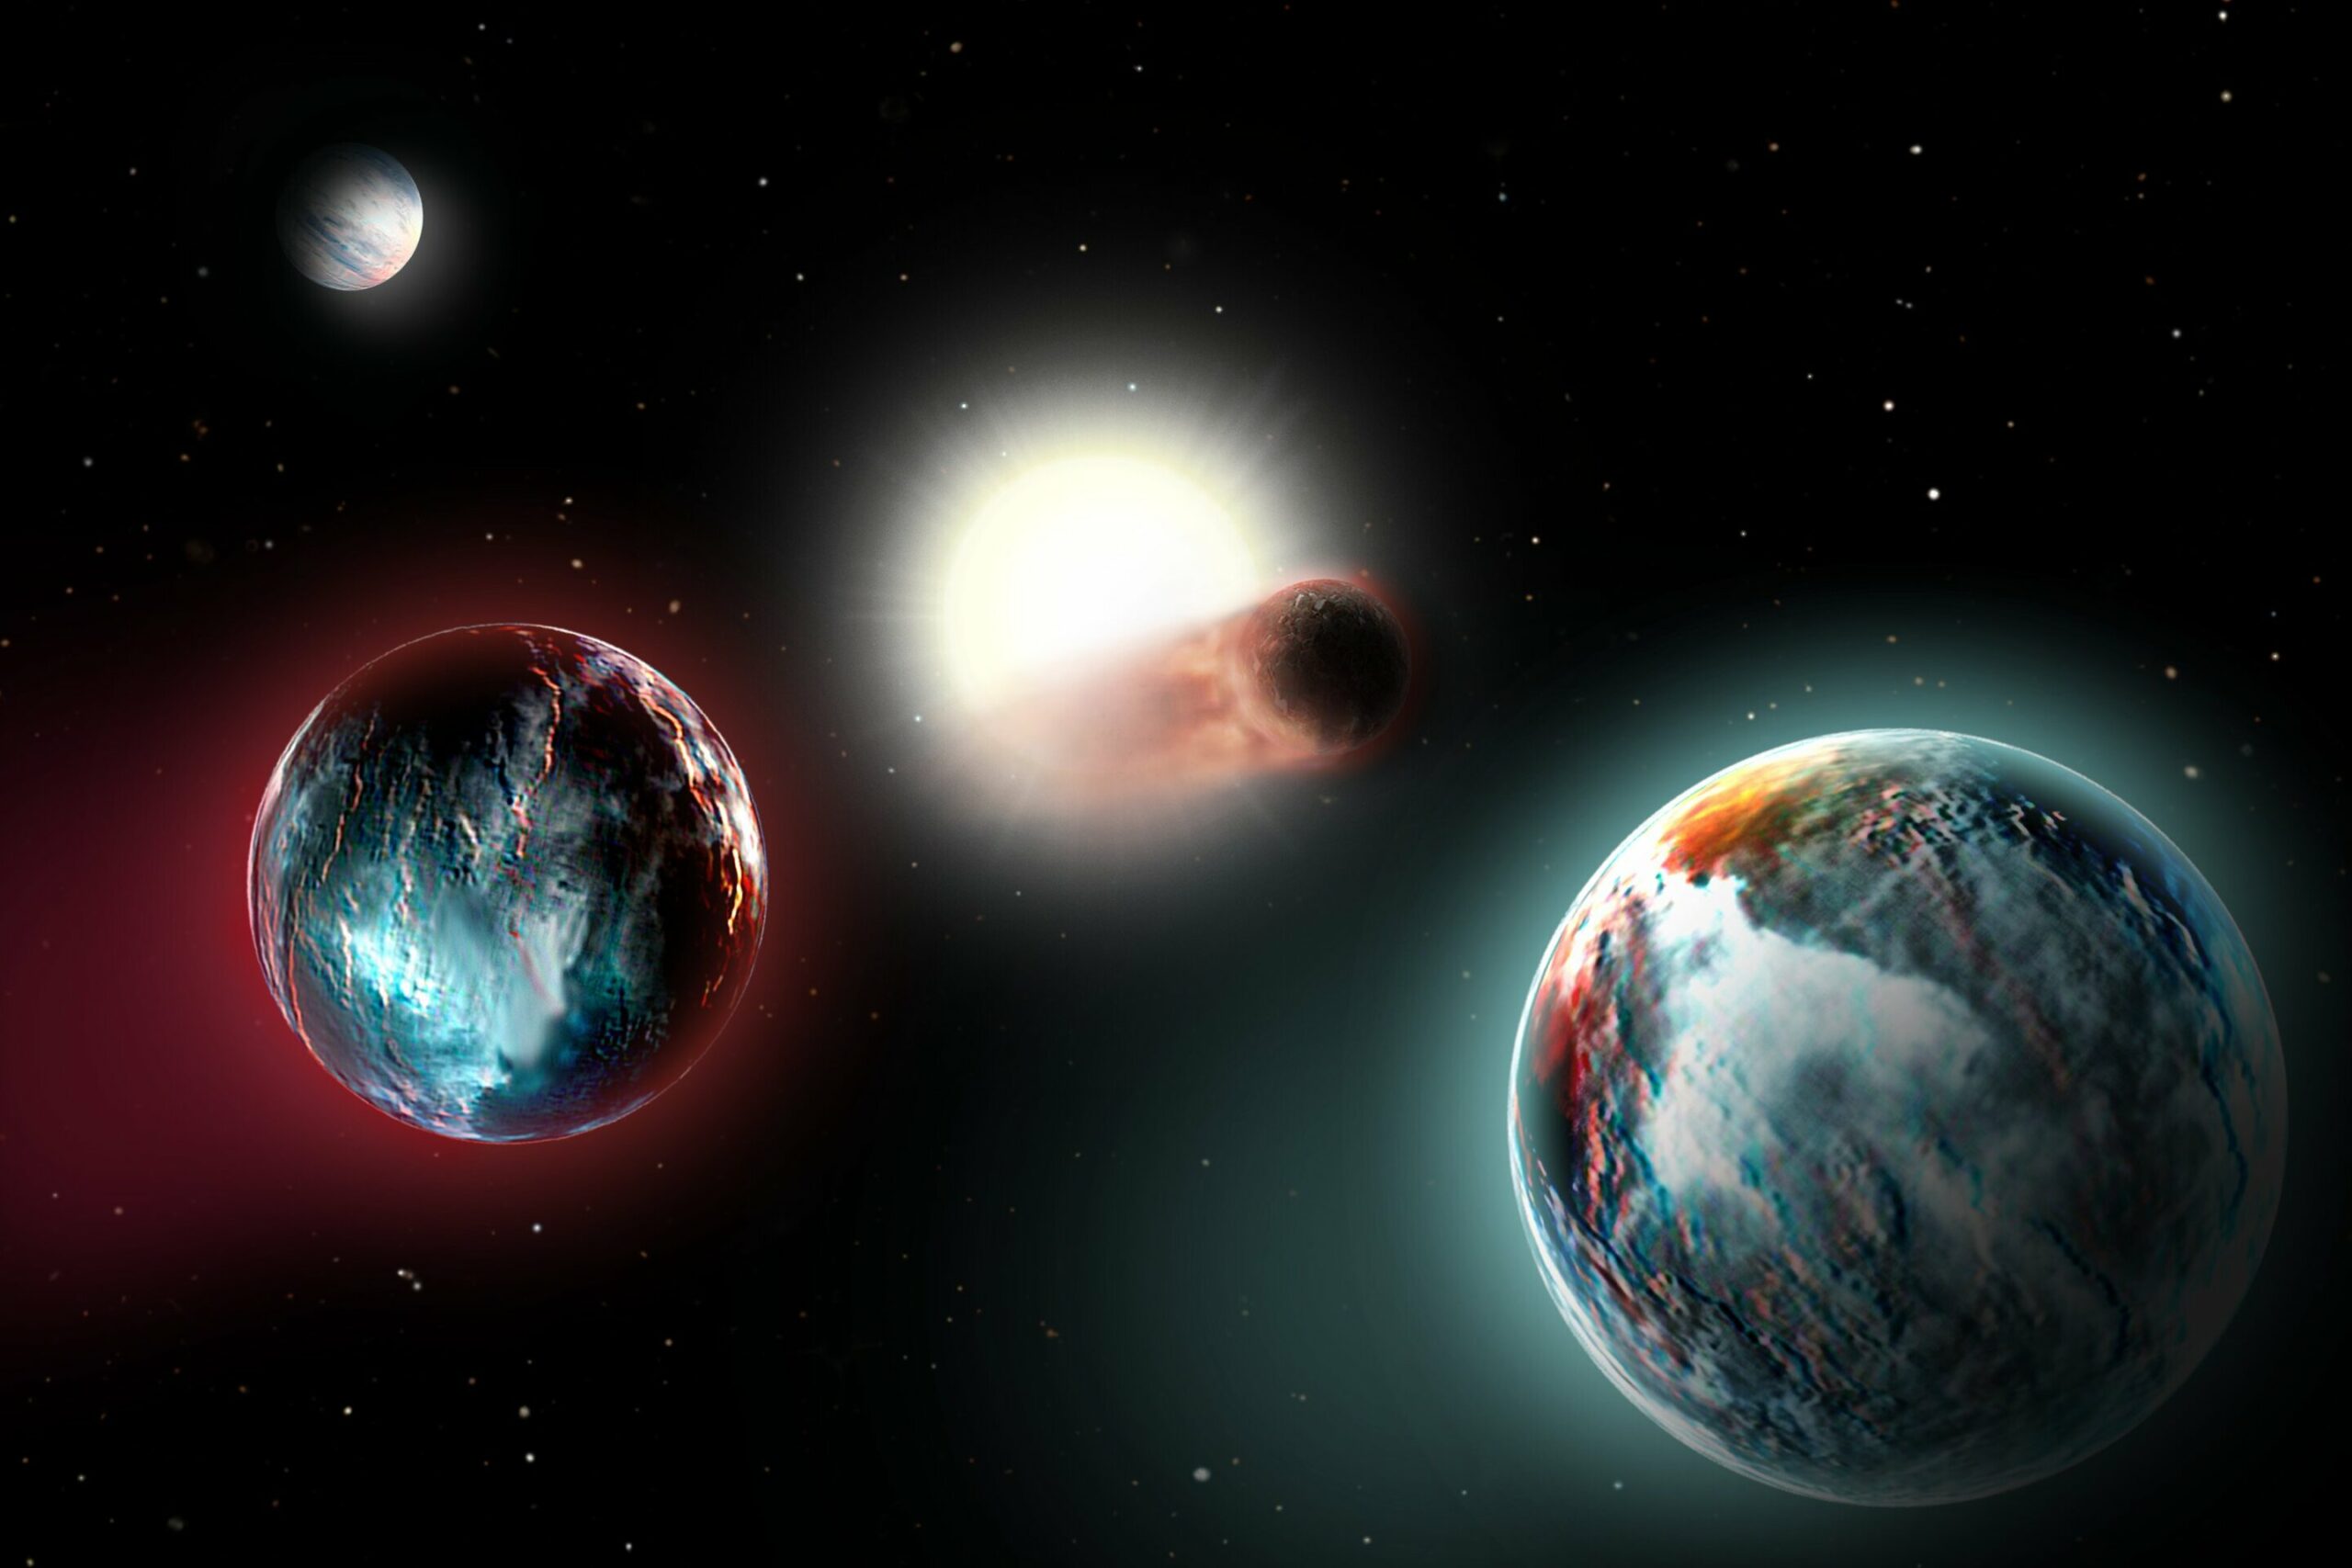 The sun’s impact on the heating of four newly discovered exoplanets.